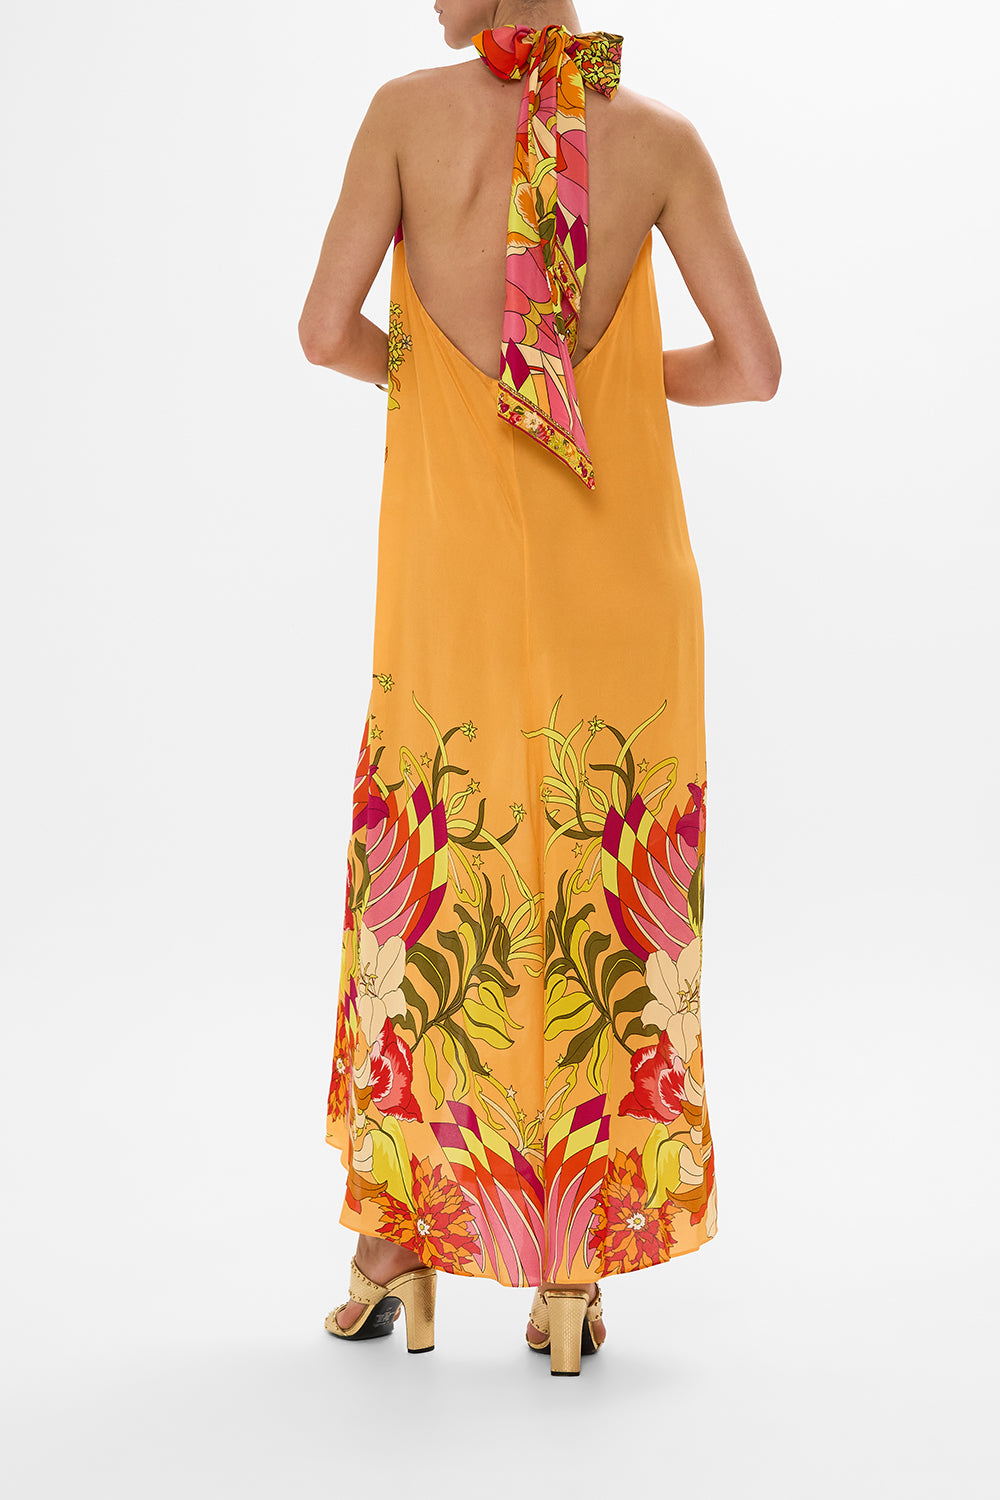 CAMILLA Floral Button Front Opening Dress in The Flower Child Society